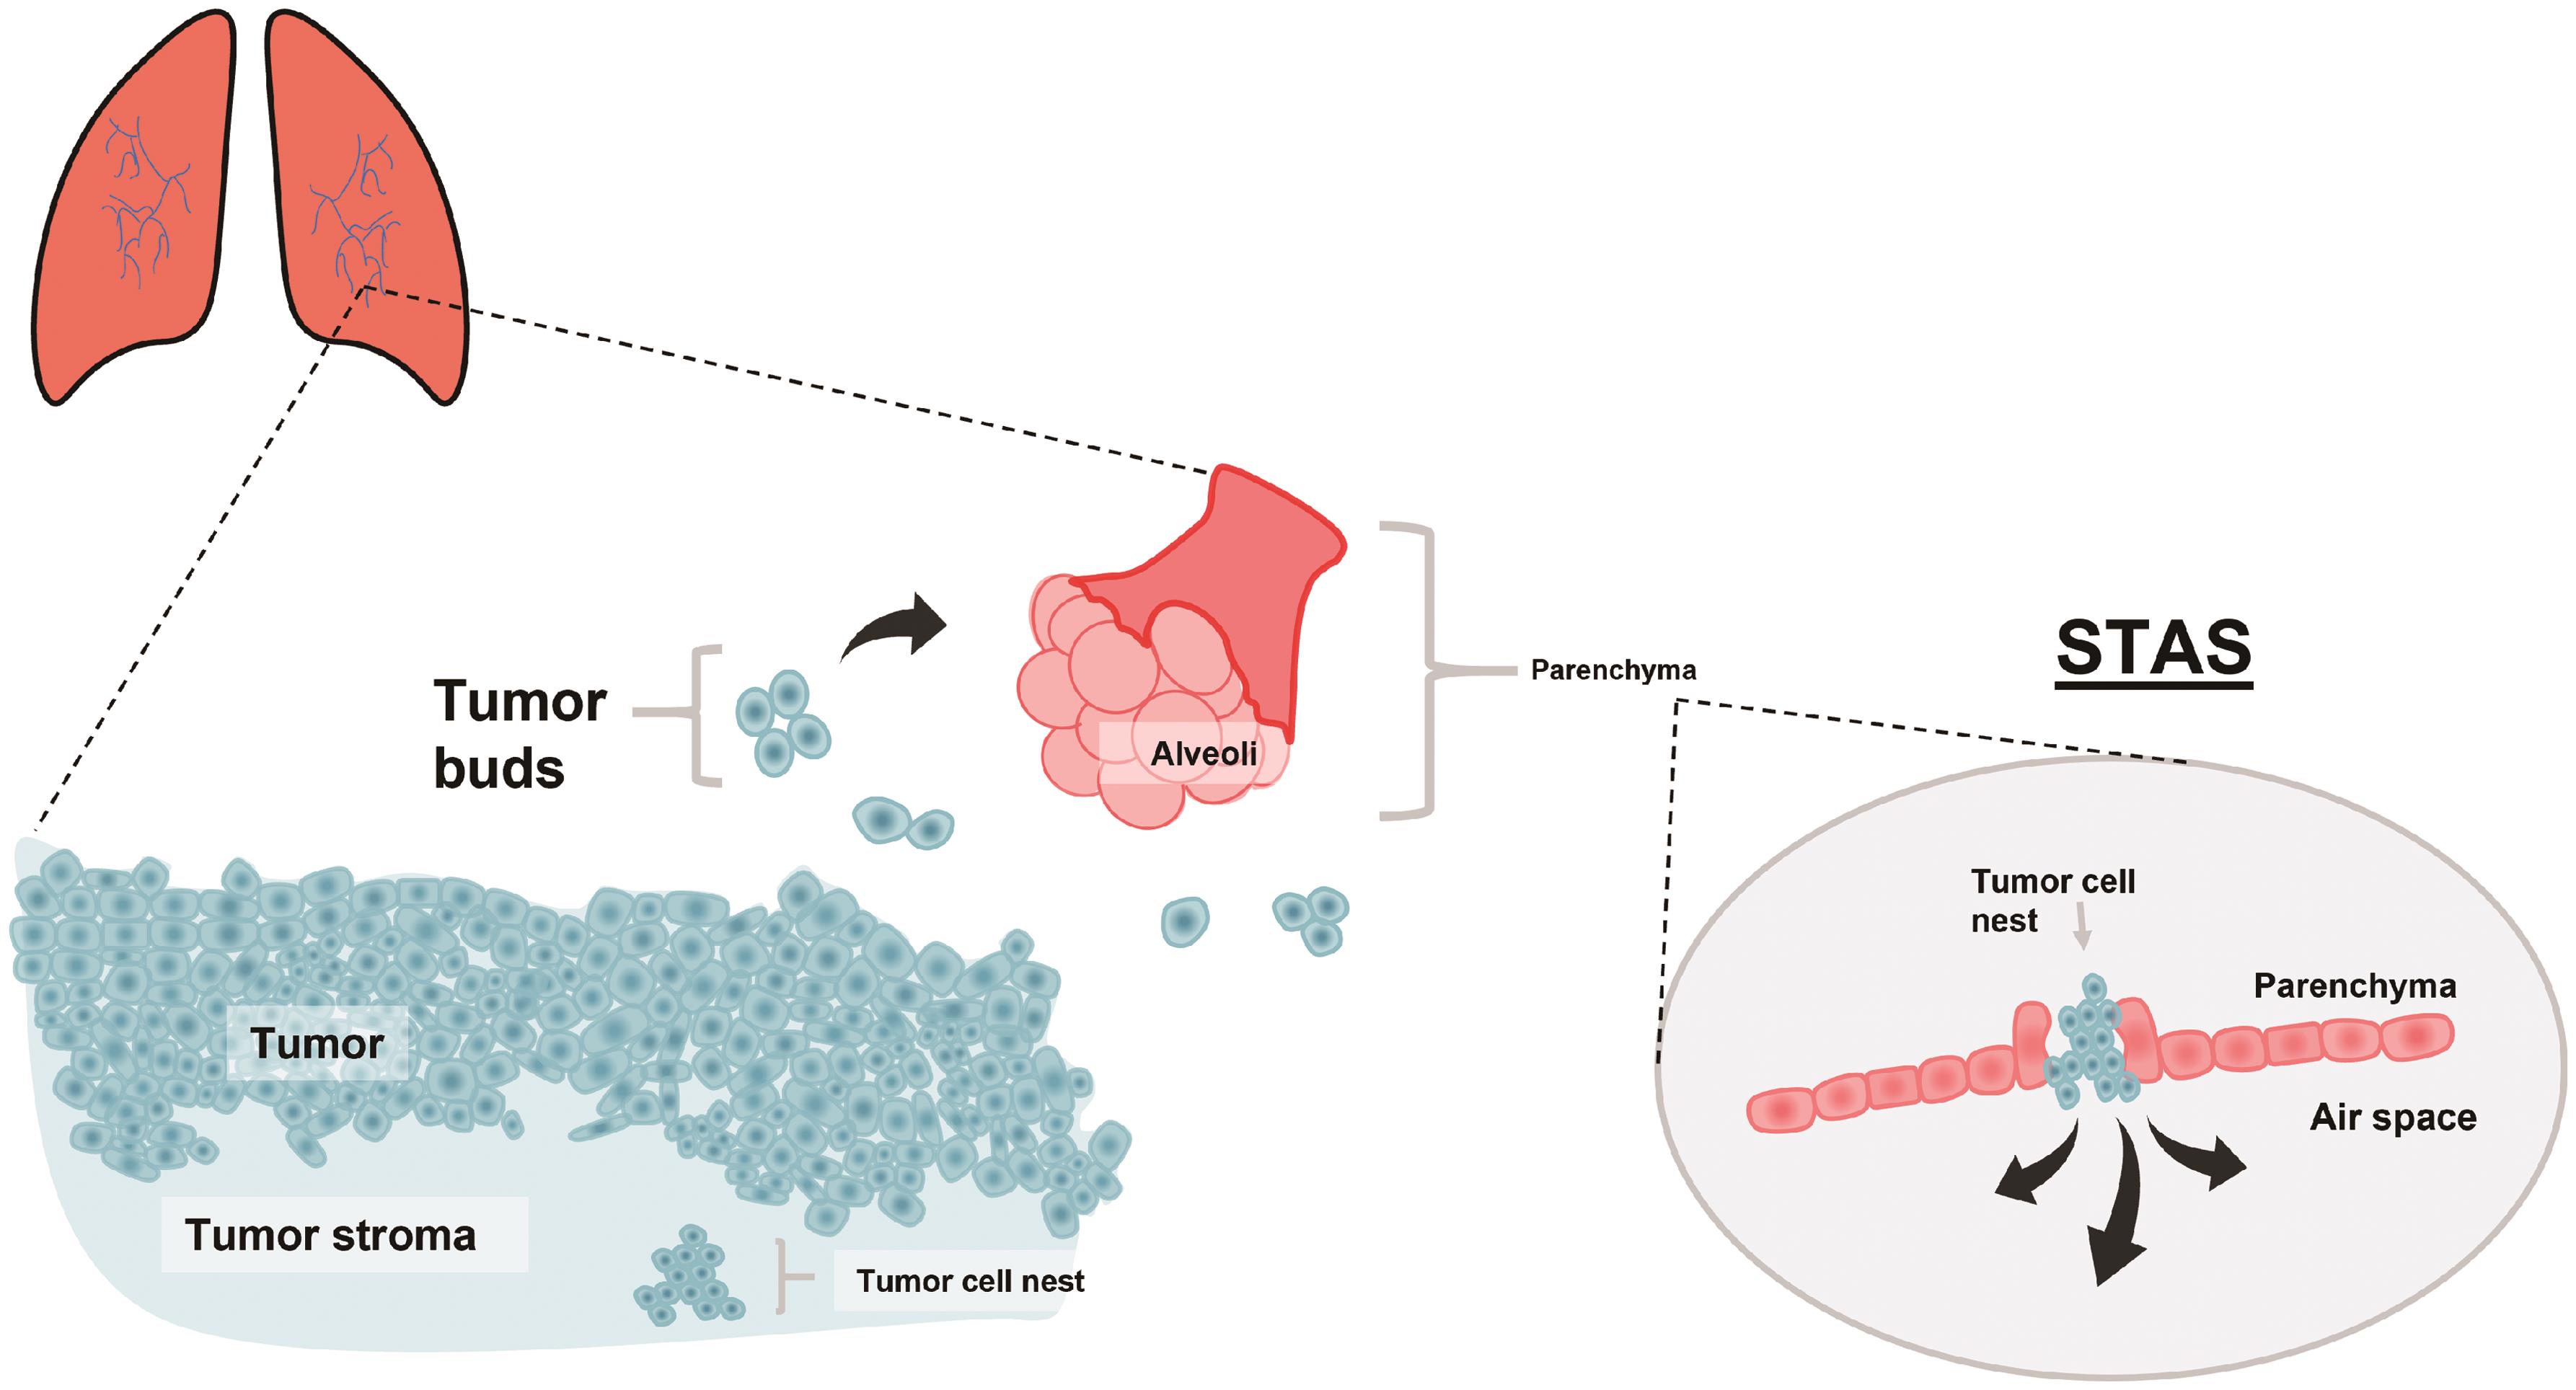 The relationship among tumors, tumor budding, tumor spread through air spaces, and tumor cell nests.